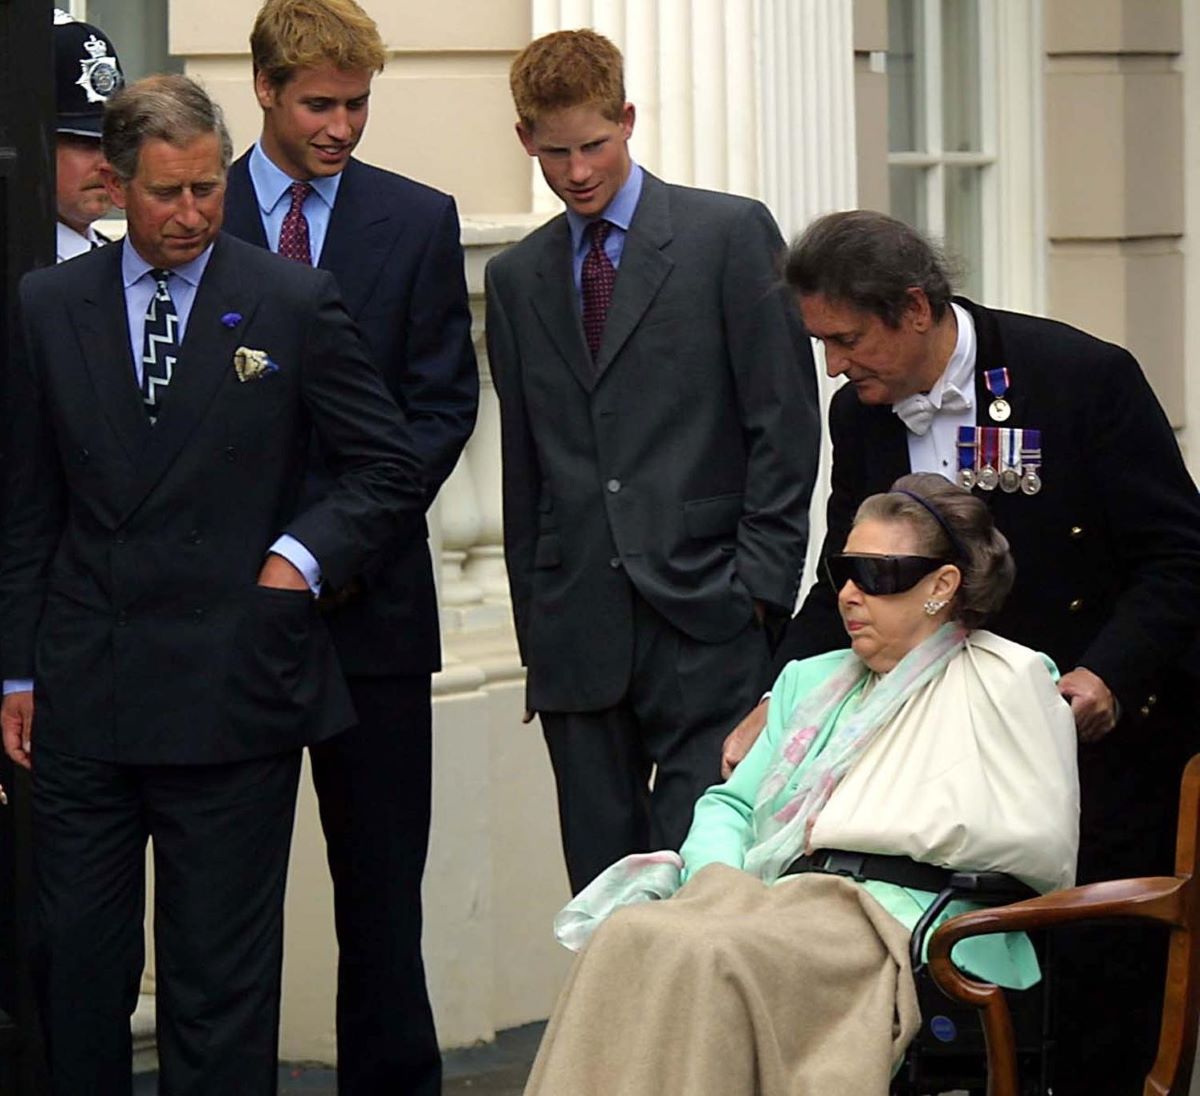 Princess Margaret being wheeled out by stewart William Tallon as the-Prince Charles, Prince William, and Prince Harry look on